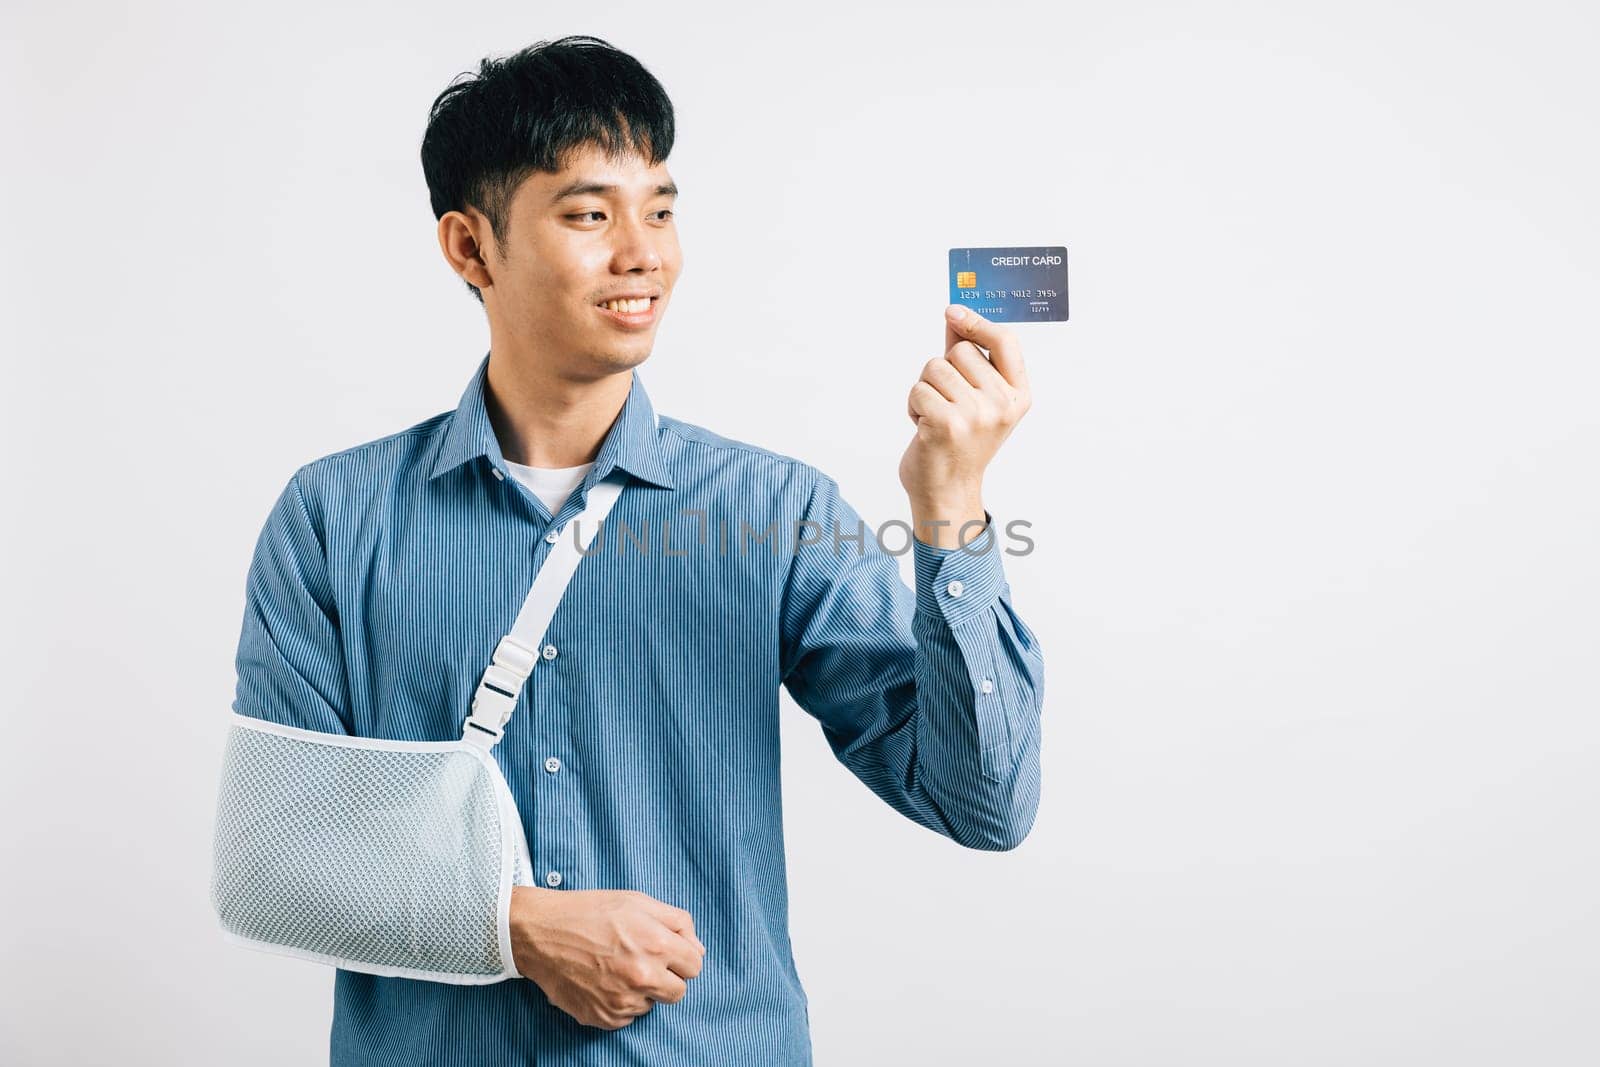 Injured man confidently smiles with a damaged arm in a support splint, managing medical expenses via credit card. Happy Asian man with sling support hand, isolated on white, showcasing health care.